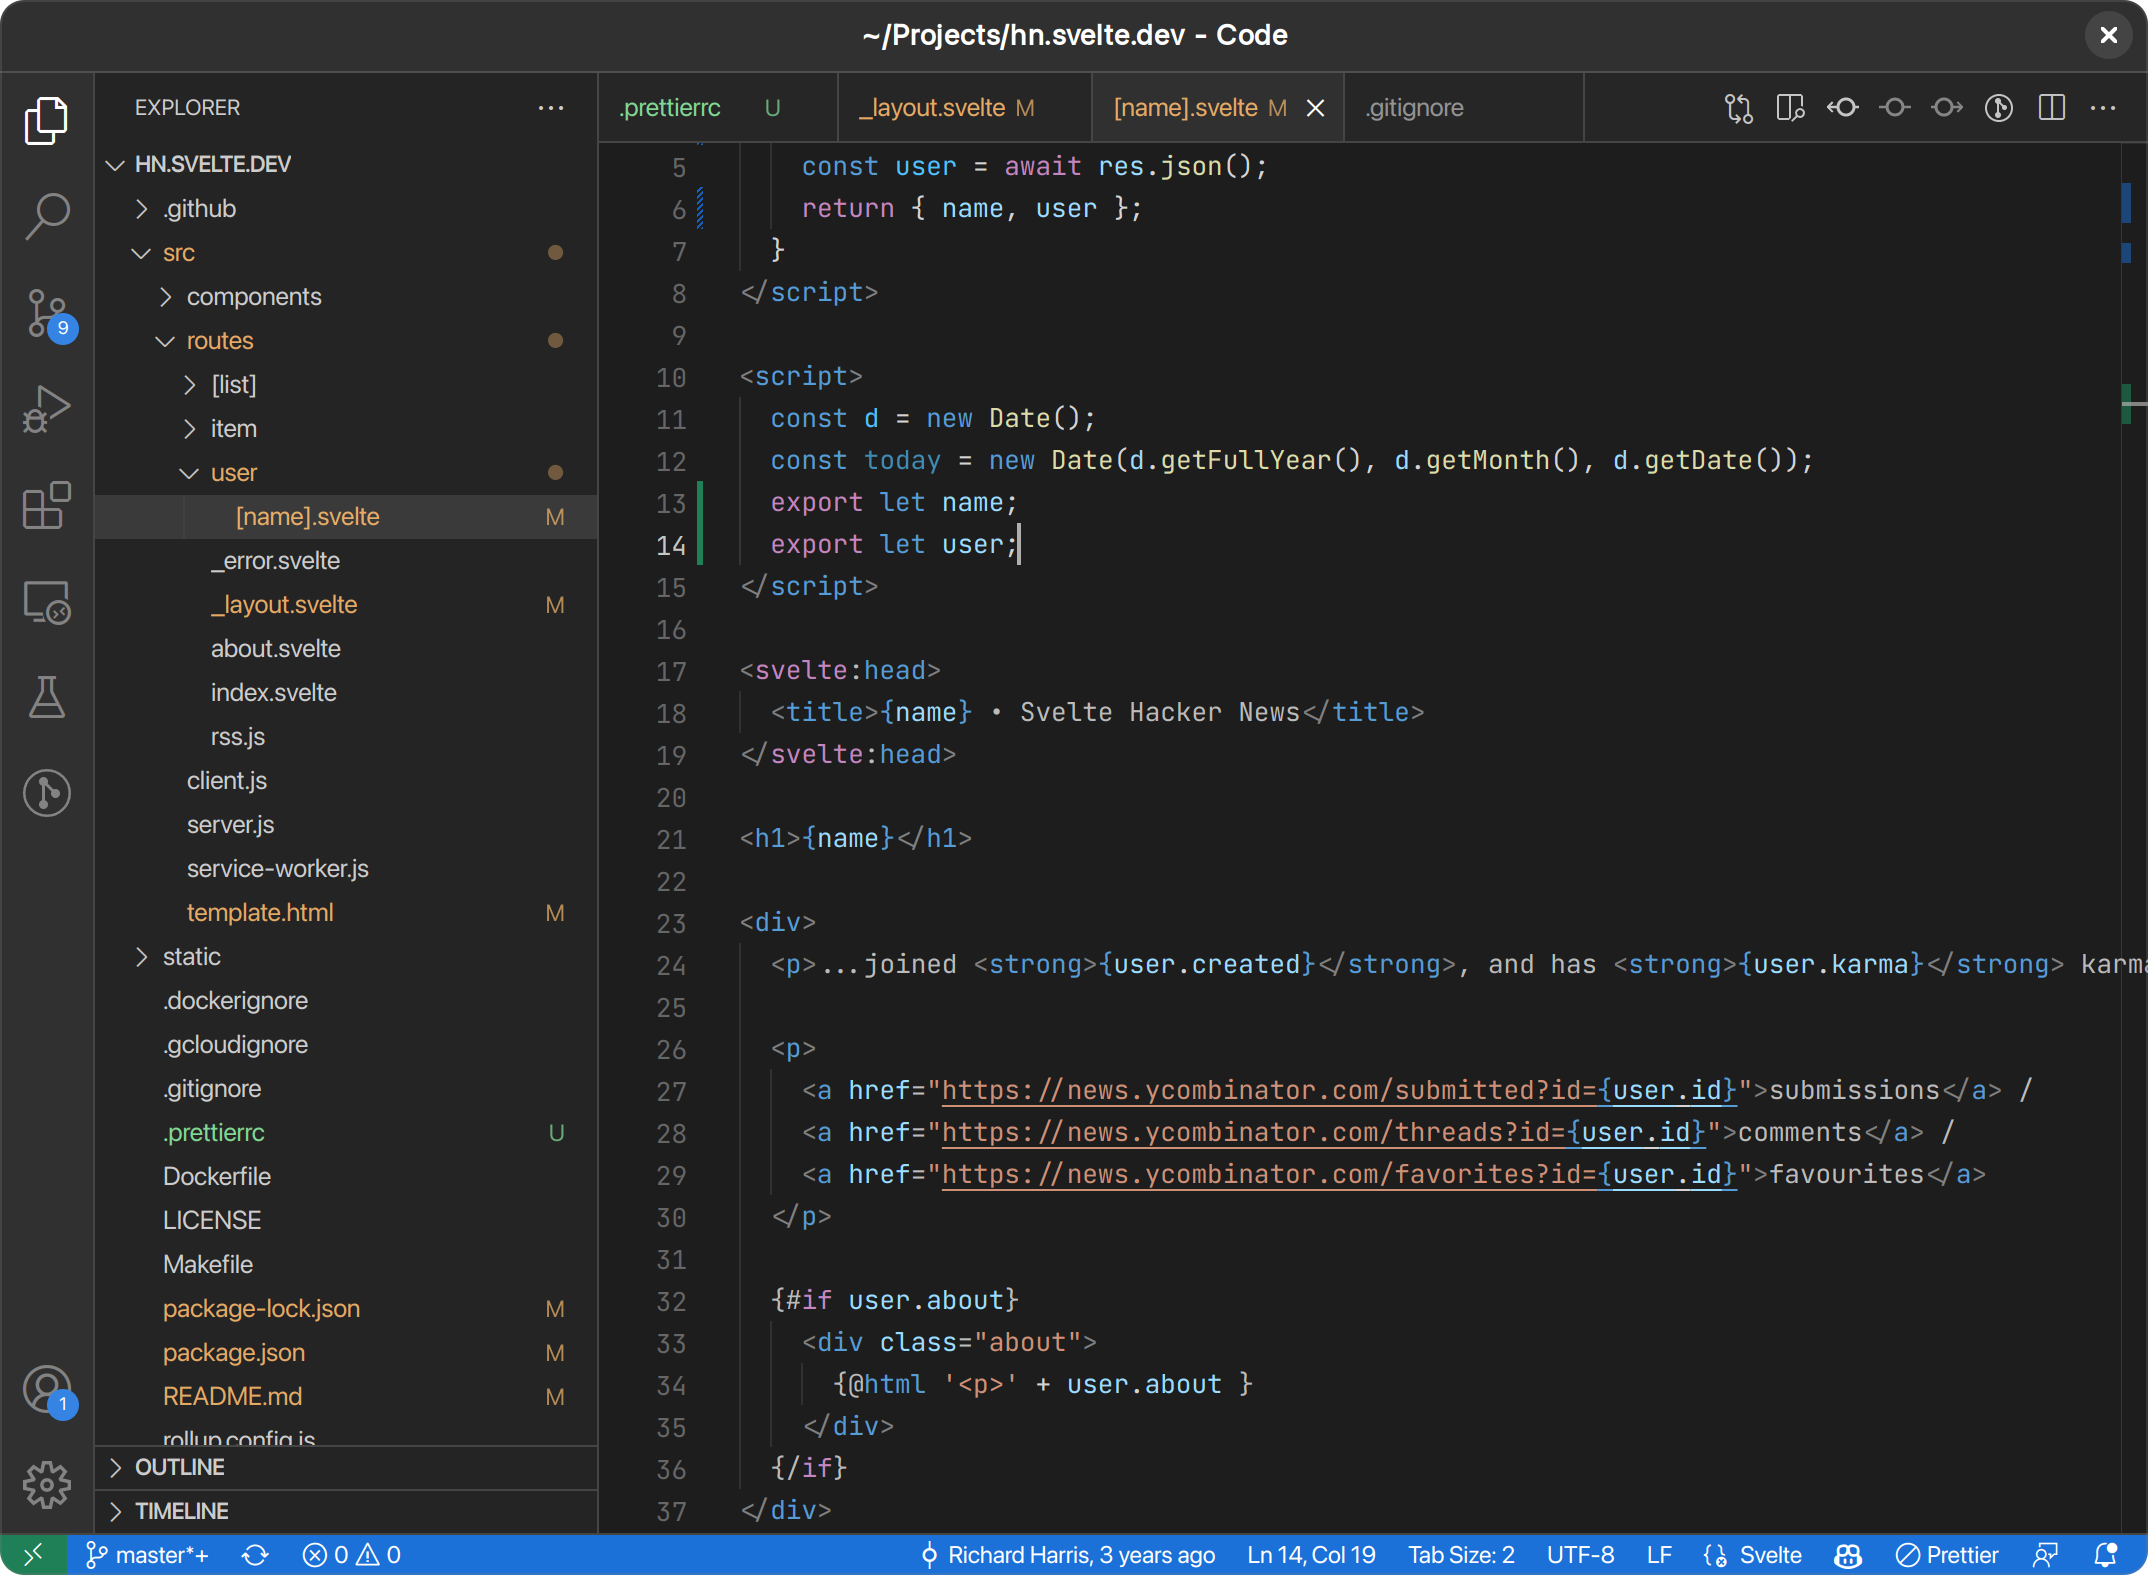 Screenshot showing the dark theme with a colorful status bar and default syntax highlighting